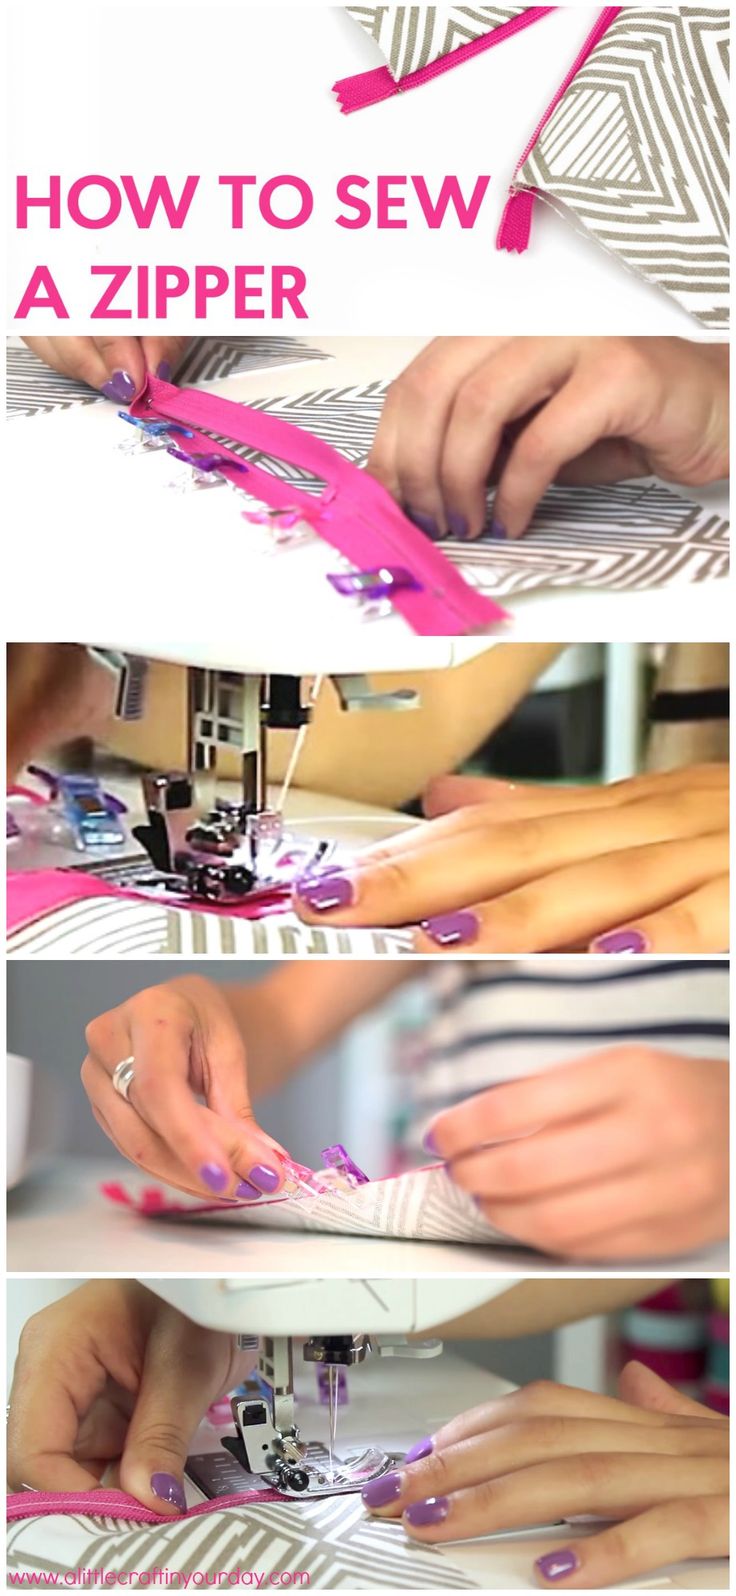 Sewing a zipper is notorious for being the hardest part of sewing,  but I promis...